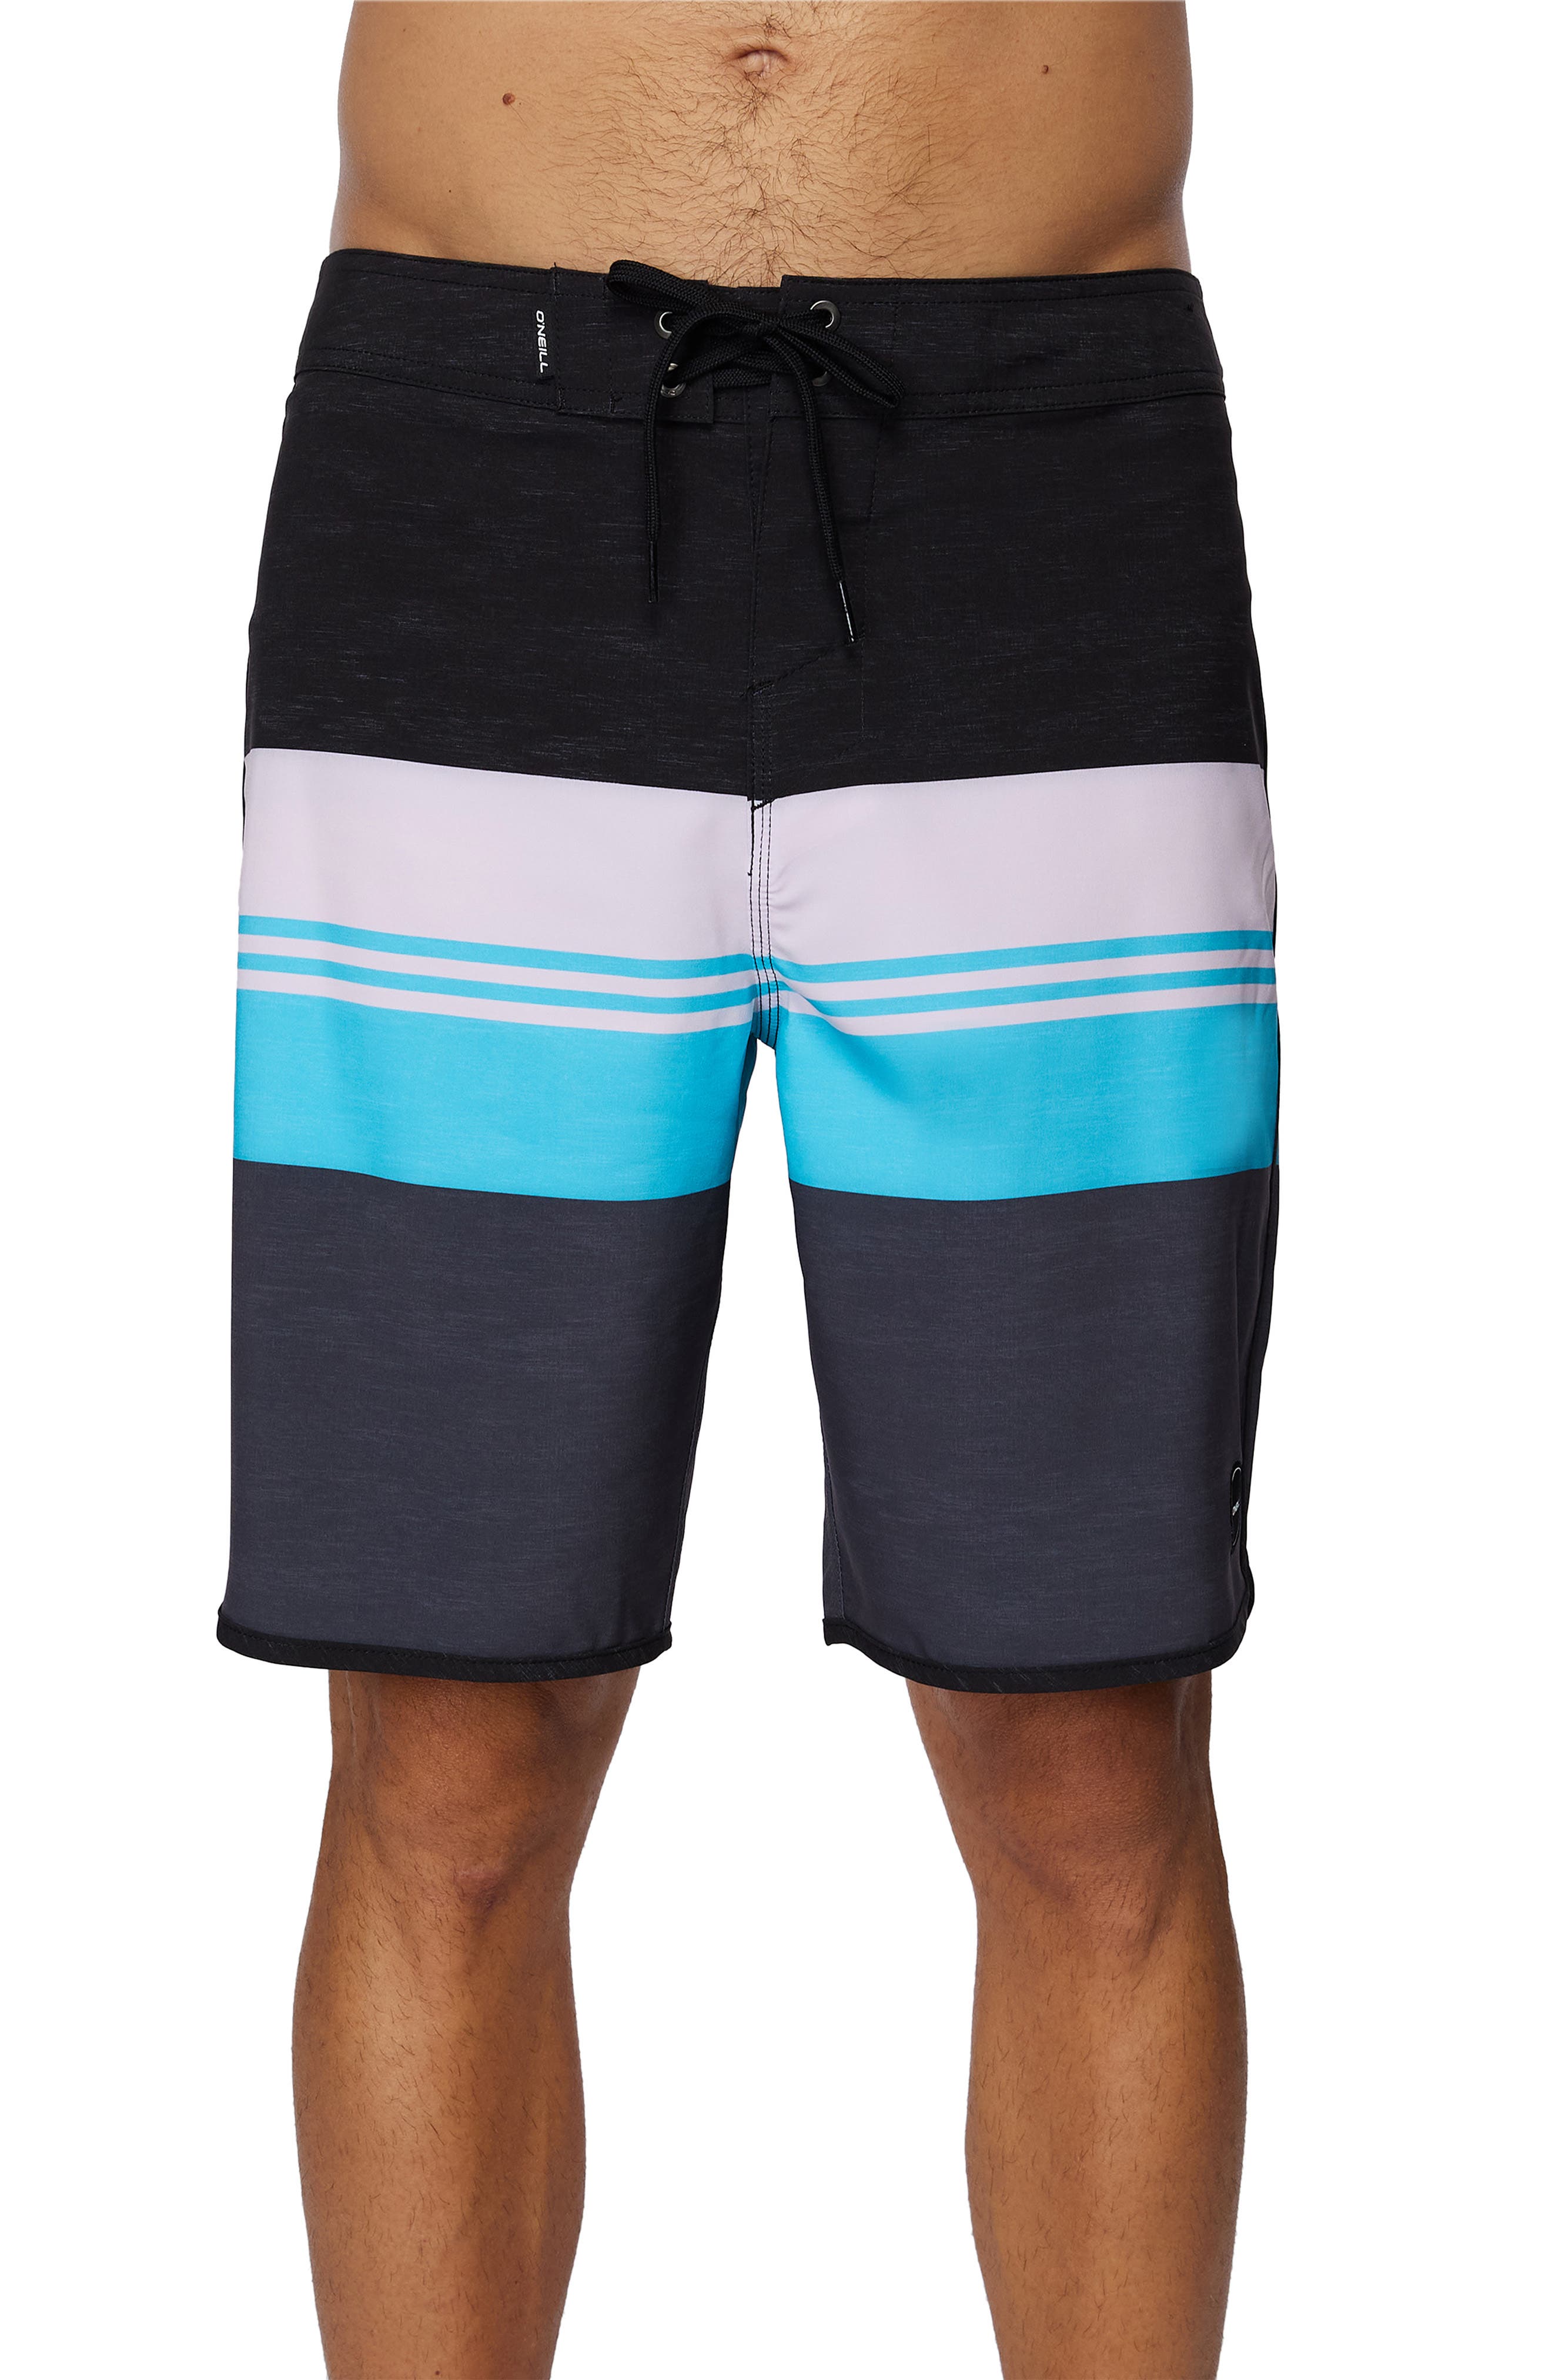 Details about   O'neill Palm Mens Shorts Swim Blue Aop All Sizes 